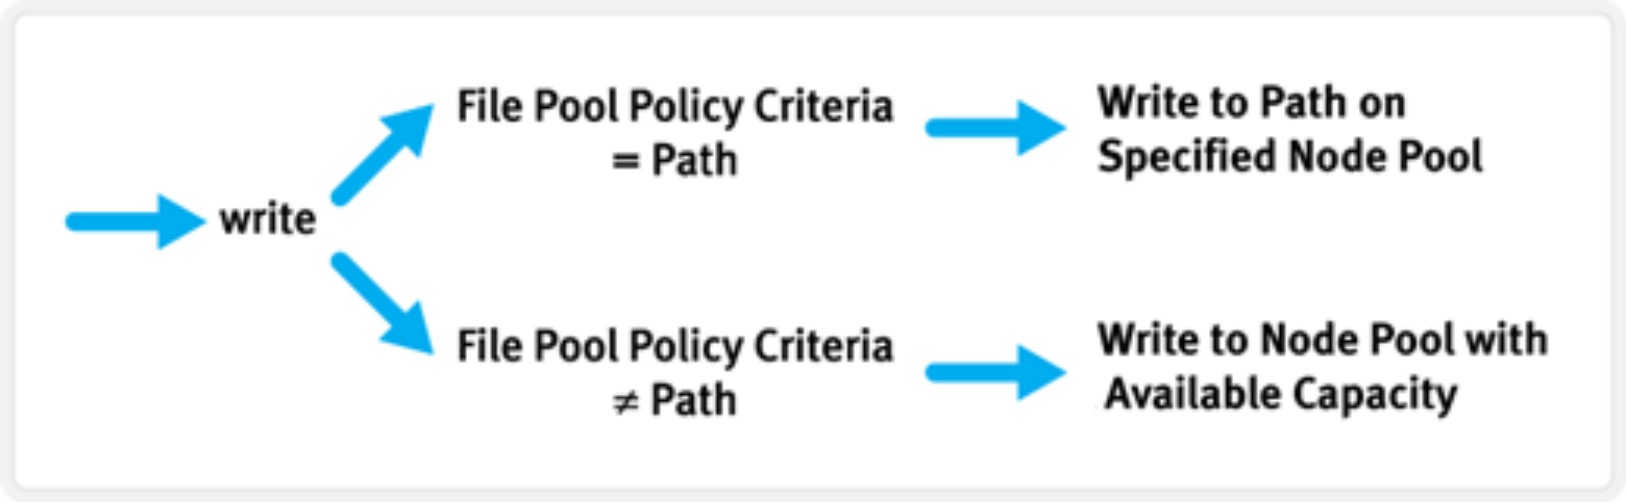 Flow chart illustrating path-based and non-path-based file pool policy criteria operation.